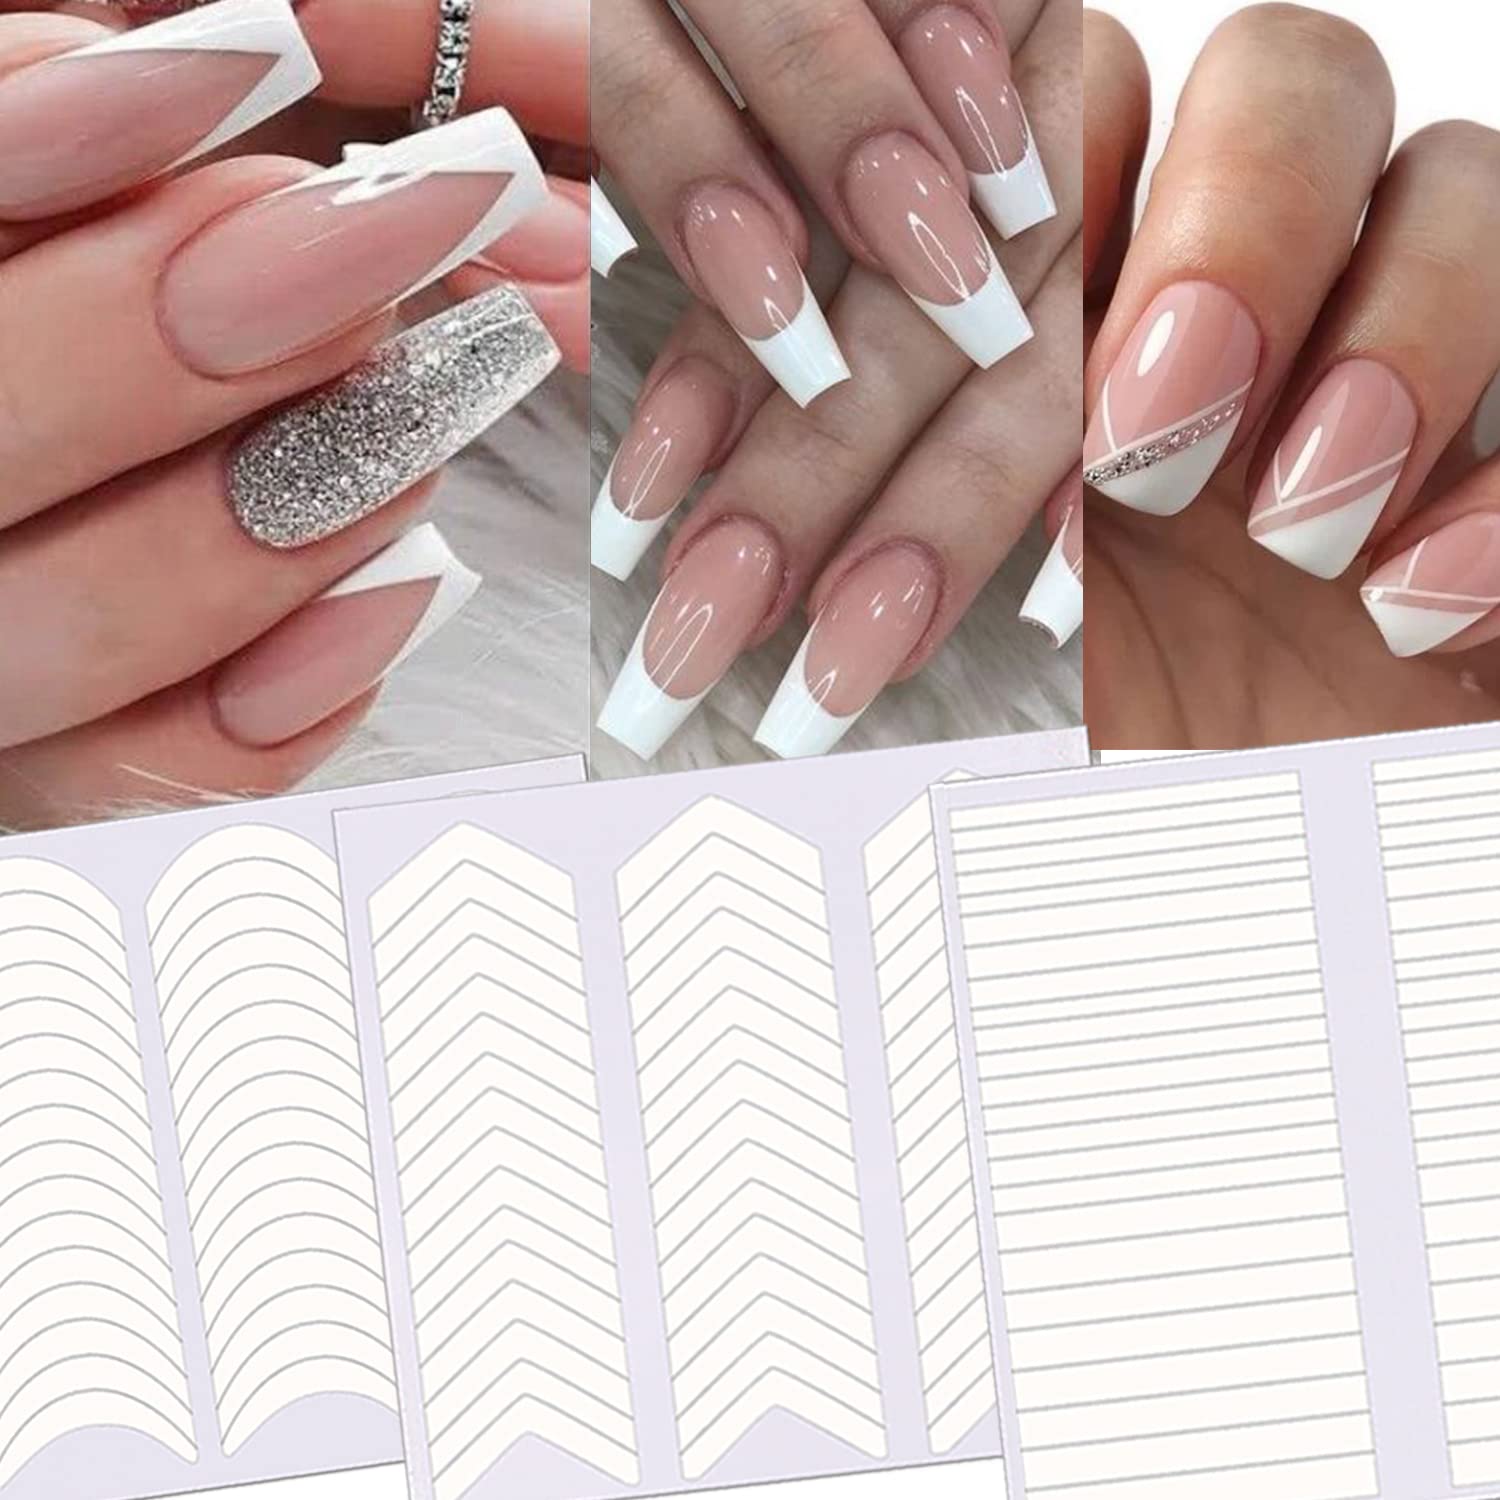 Butterfly French Manicure Nail Art Design Stock Photo - Download Image Now  - Butterfly - Insect, Manicure, Nail Art - iStock